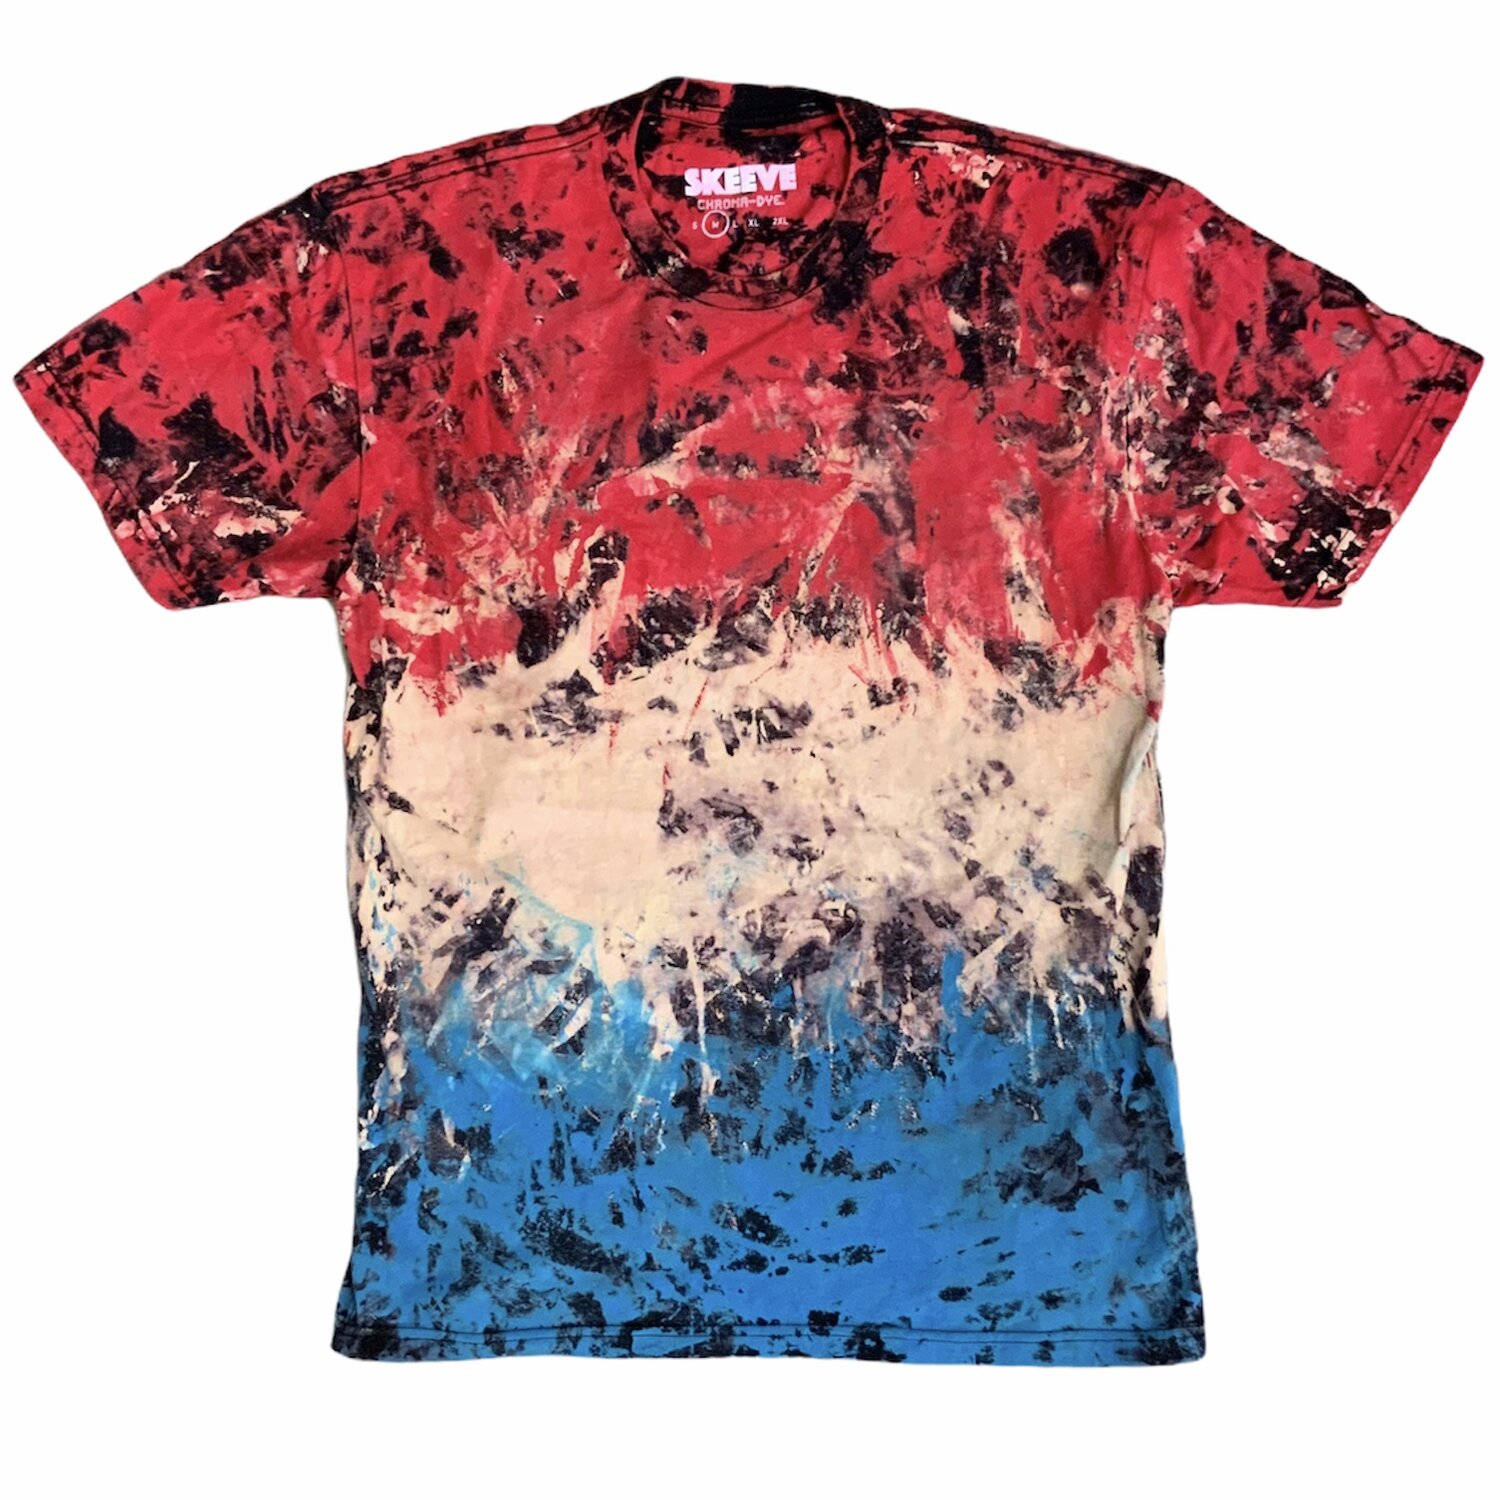 No. 9900- Medium — Limited and | Chroma-dye streetwear Street - screen Tshirts Chroma-Dye clothes. Skeeve release Apparel printed Co